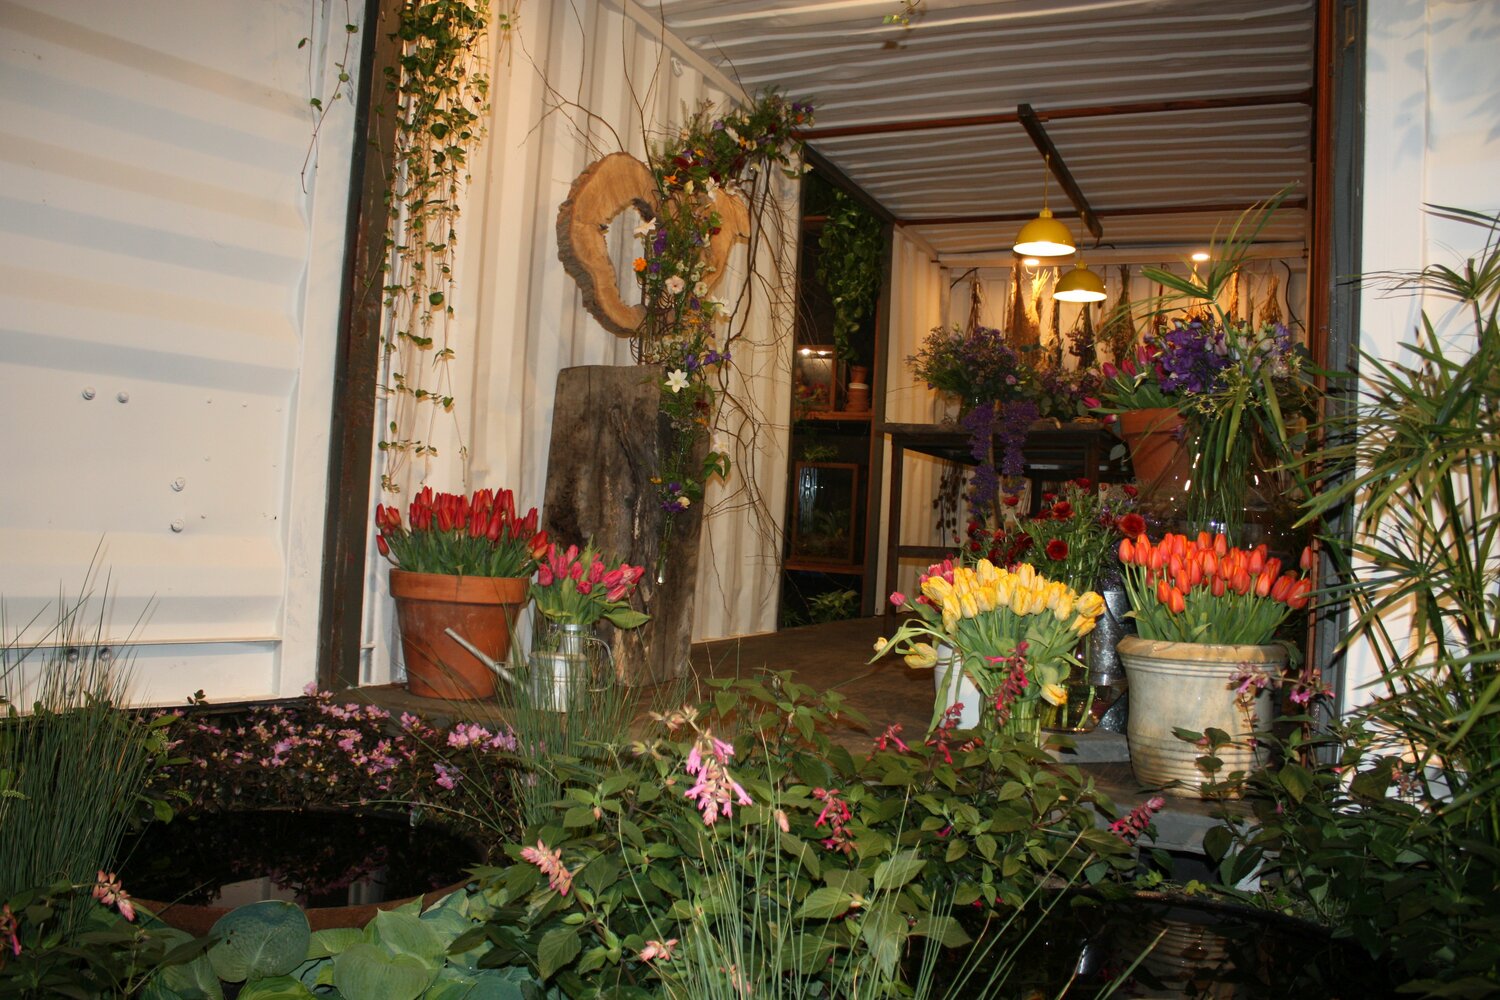 “Two Worlds,” a florist’s studio and urban retreat, is by Mark Cook Landscape & Contracting, of Doylestown.